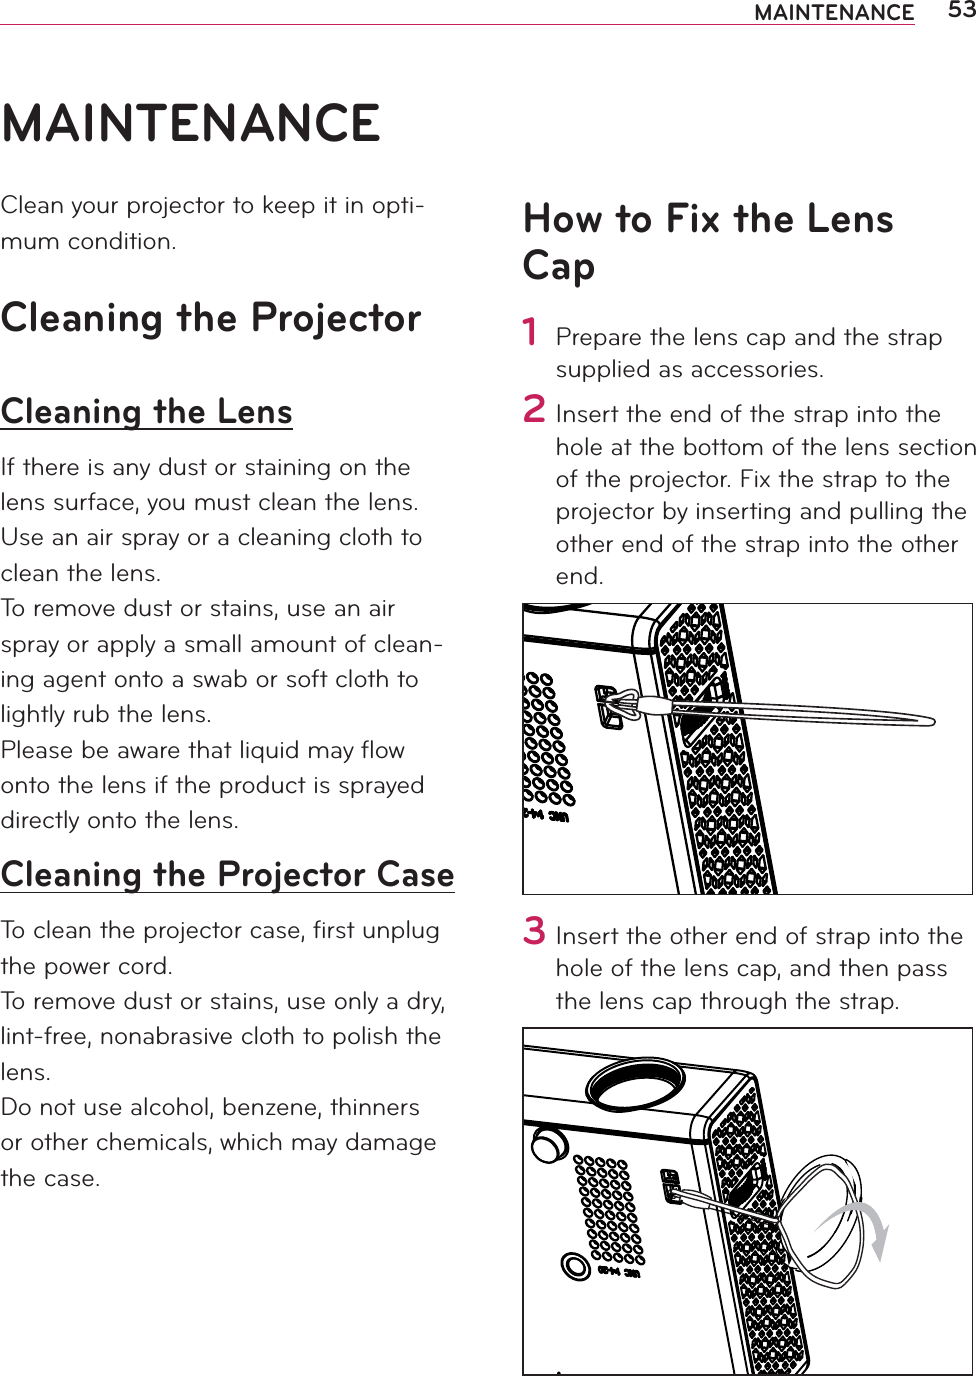 53MAINTENANCEMAINTENANCEClean your projector to keep it in opti-mum condition.Cleaning the ProjectorCleaning the LensIf there is any dust or staining on the lens surface, you must clean the lens.Use an air spray or a cleaning cloth to clean the lens.To remove dust or stains, use an air spray or apply a small amount of clean-ing agent onto a swab or soft cloth to lightly rub the lens.Please be aware that liquid may ﬂow onto the lens if the product is sprayed directly onto the lens.Cleaning the Projector CaseTo clean the projector case, ﬁrst unplug the power cord.To remove dust or stains, use only a dry, lint-free, nonabrasive cloth to polish the lens.Do not use alcohol, benzene, thinners or other chemicals, which may damage the case.How to Fix the Lens Cap1 Prepare the lens cap and the strap supplied as accessories. 2 Insert the end of the strap into the hole at the bottom of the lens section of the projector. Fix the strap to the projector by inserting and pulling the other end of the strap into the other end.3 Insert the other end of strap into the hole of the lens cap, and then pass the lens cap through the strap.